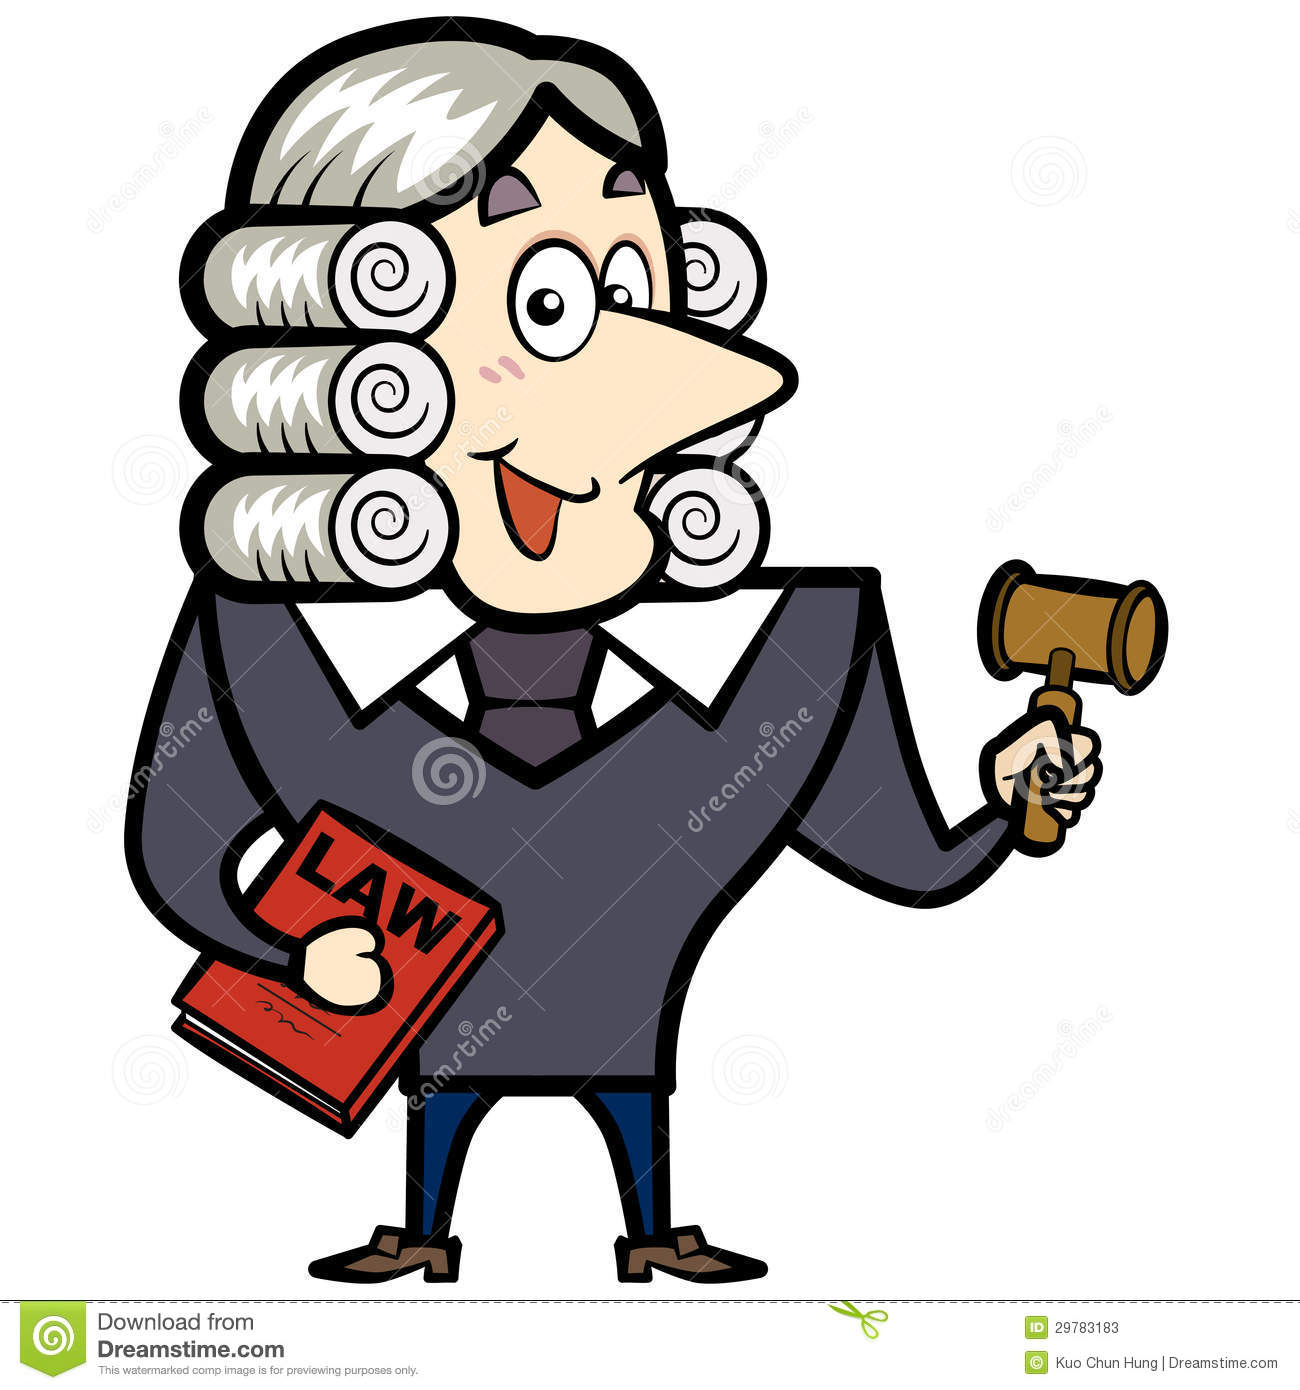 Cartoon Judge With A Gavel And Law Book Stock Photos   Image  29783183